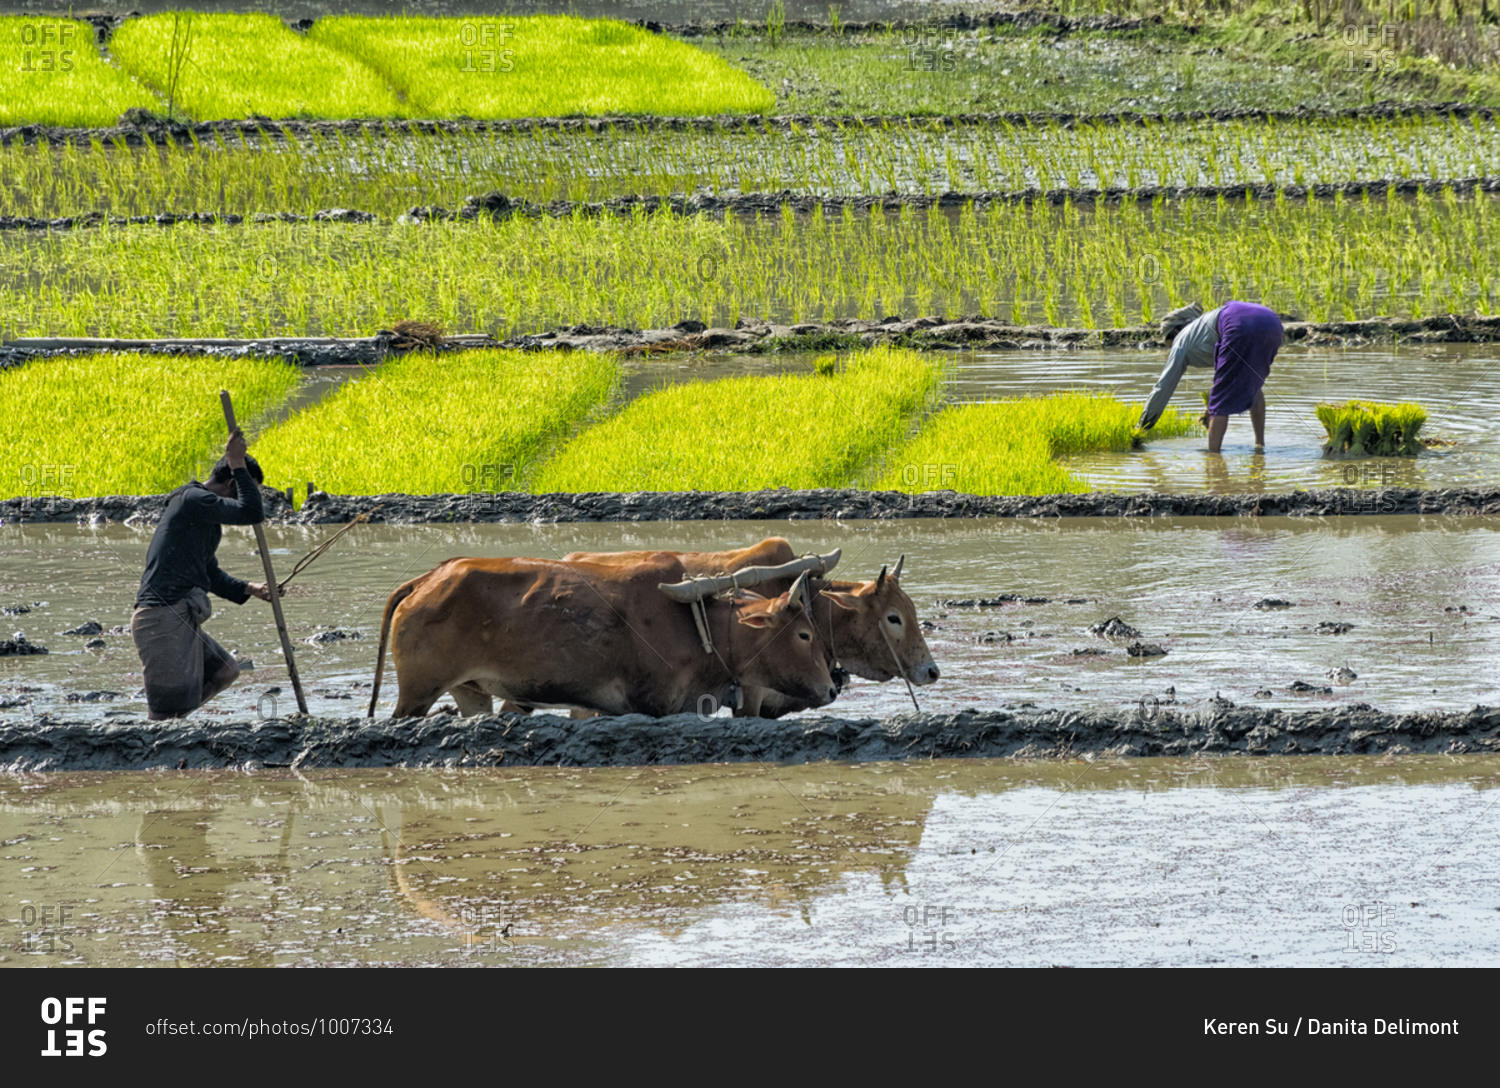 Farmers planting rice seedlings and plowing with cow in the rice paddy, Rangamati, Chittagong Division, Bangladesh